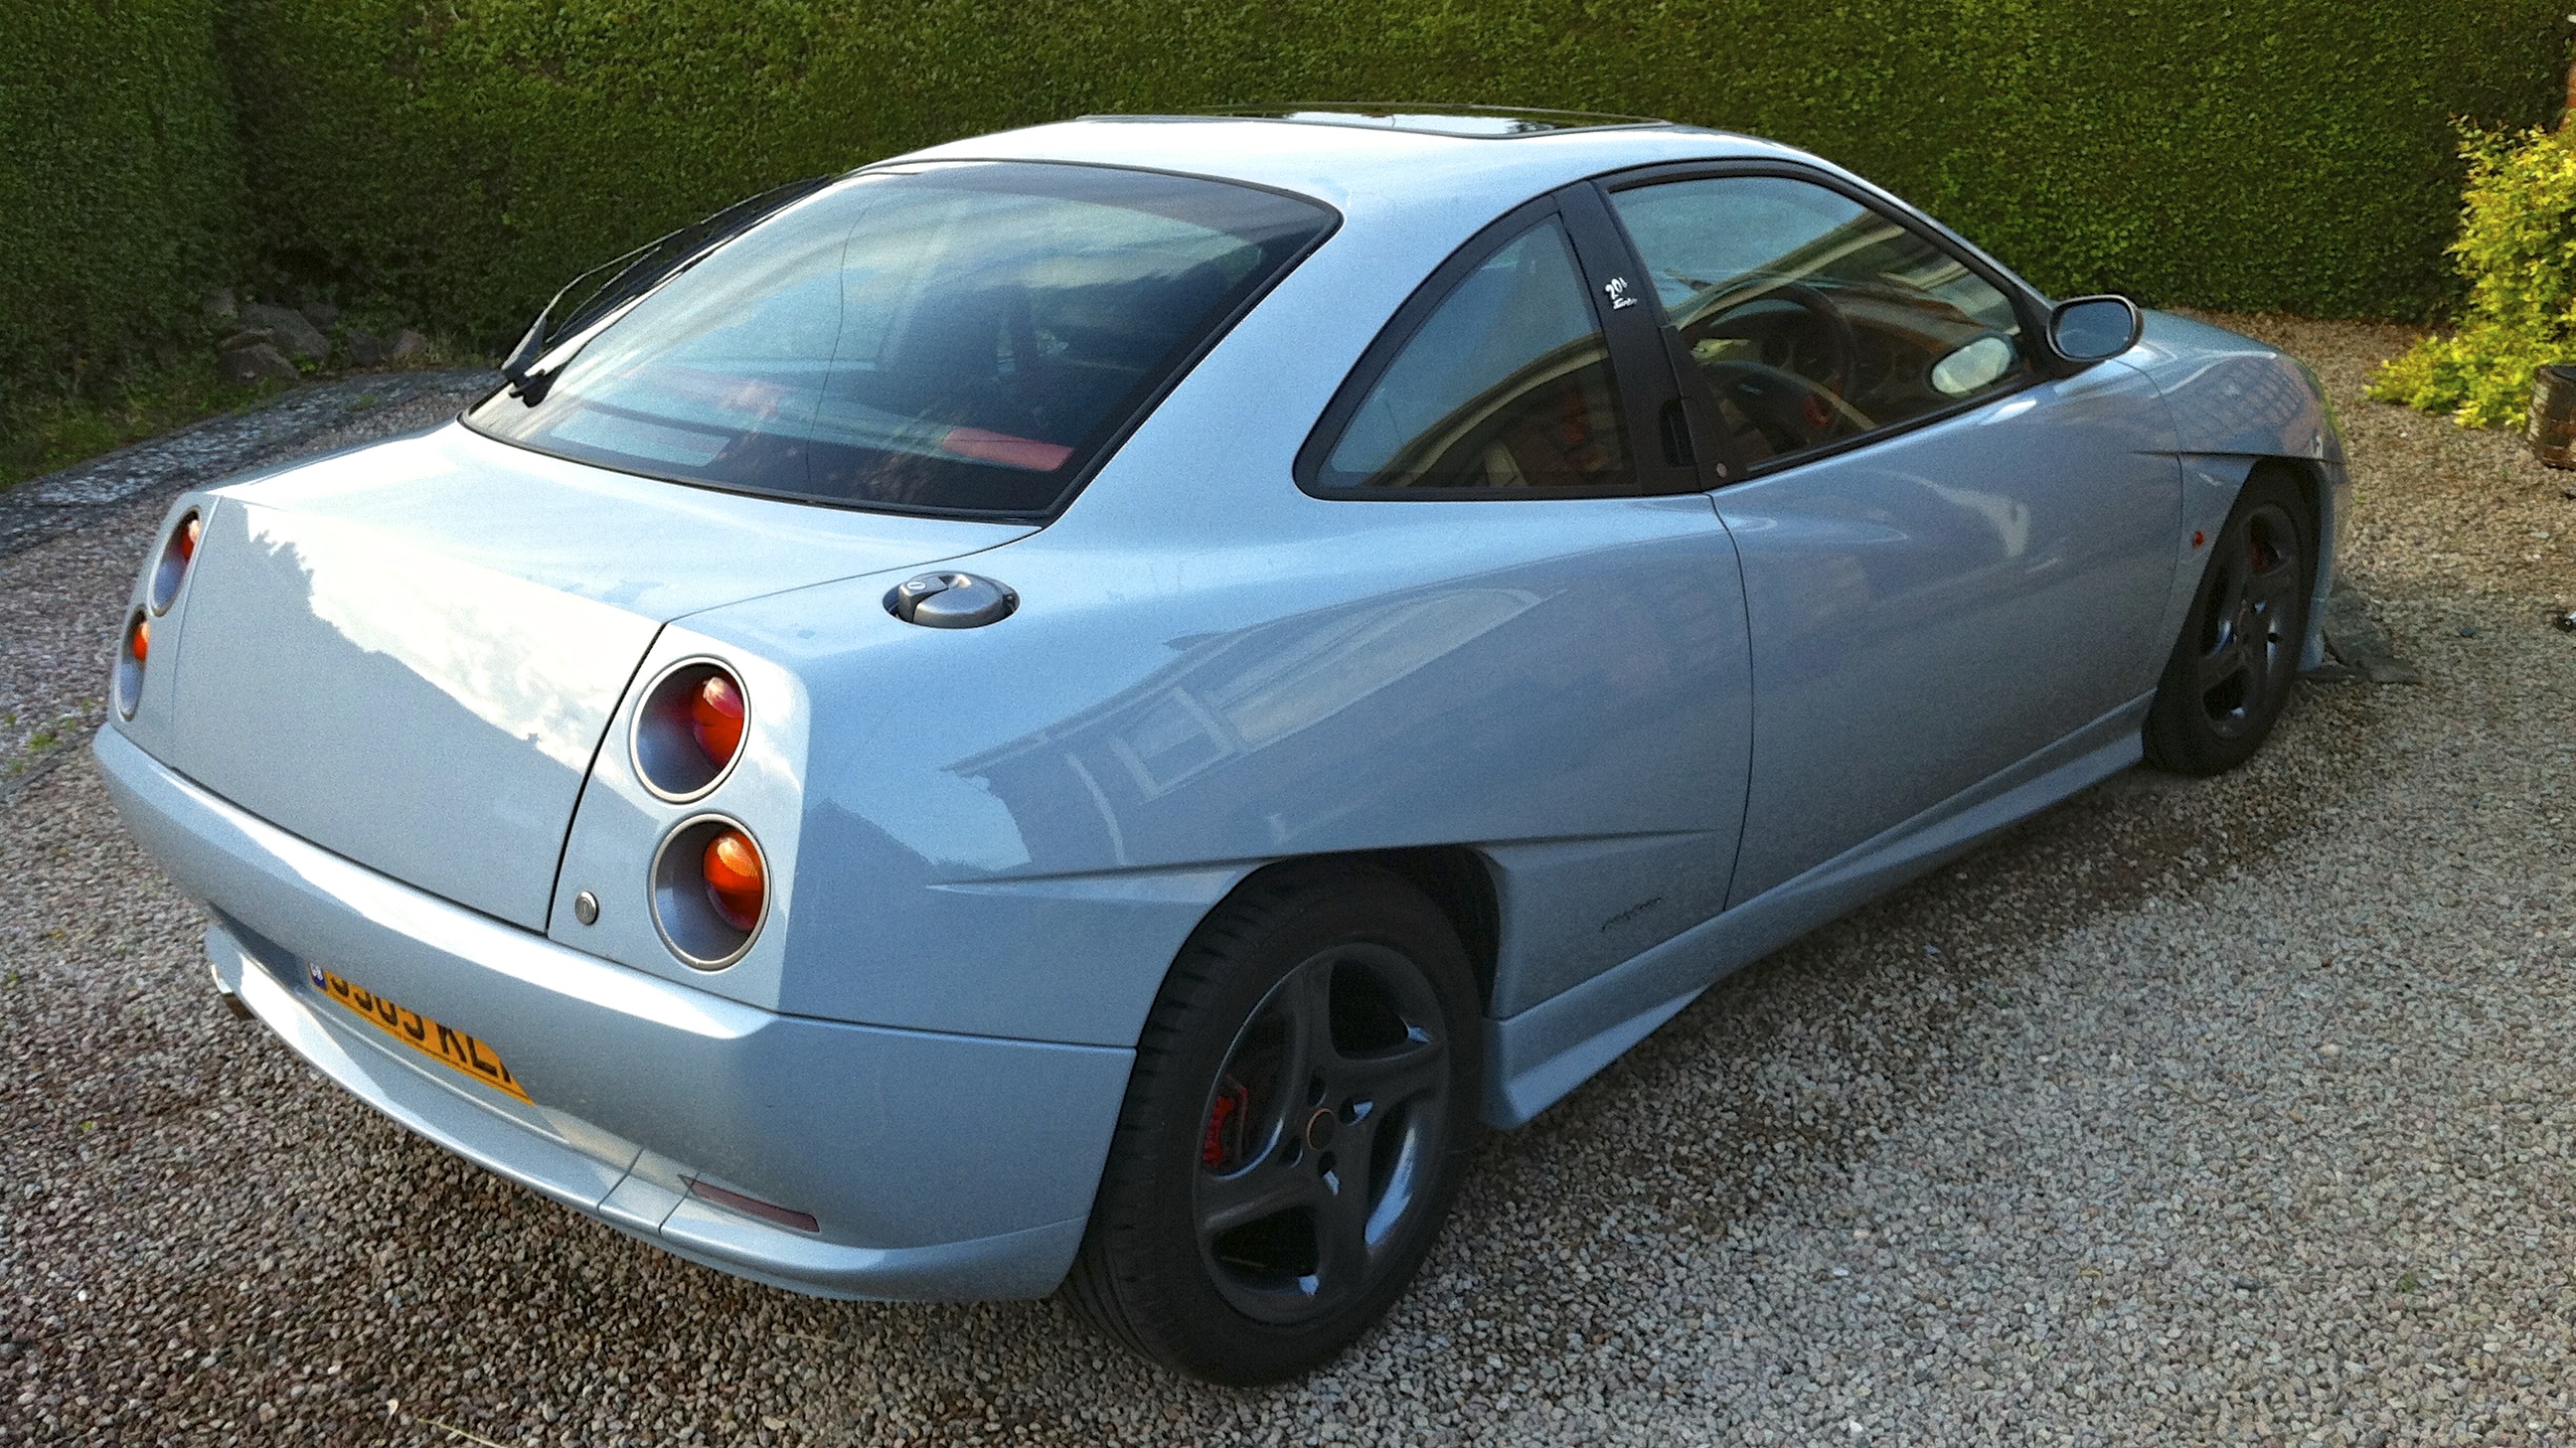 Fiat Coupe 20V Turbo Limited Edition - Page 1 - Readers' Cars - PistonHeads